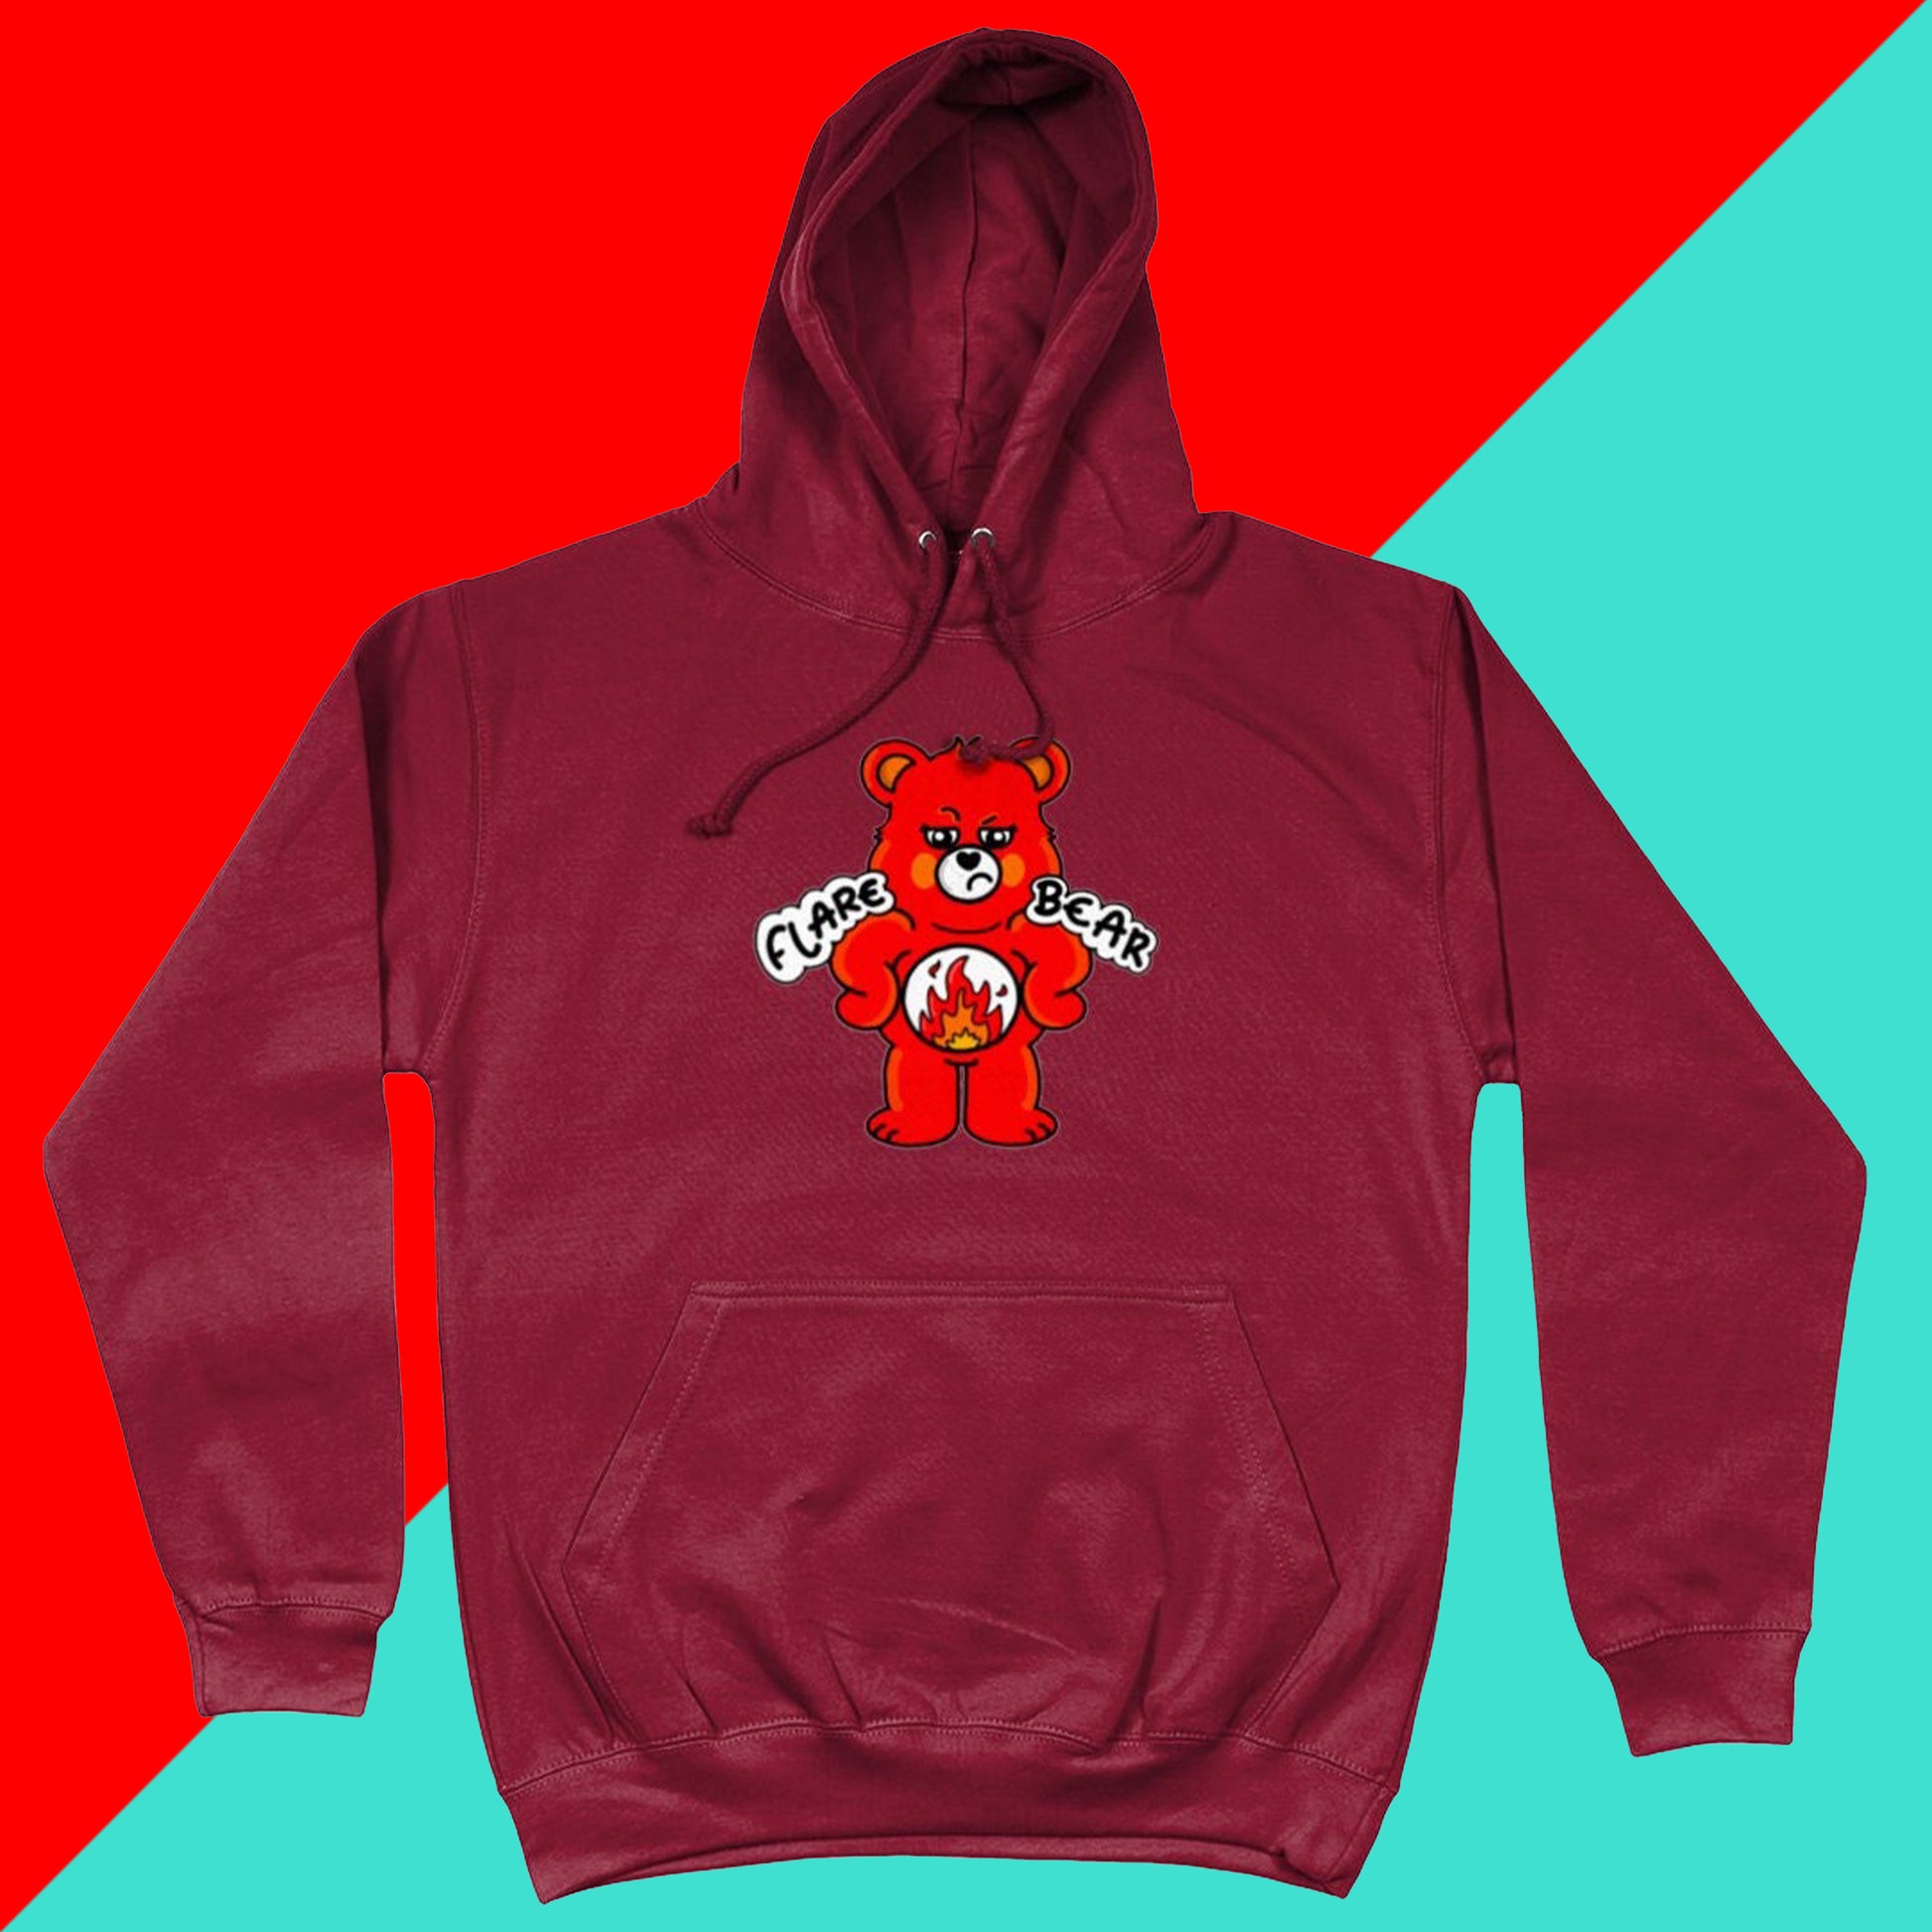 Flare Bear hoodie jumper in red hot chilli shown on a red and blue background. The hoodie is of a red bear with a fed up expression and hands on its hips. There is a white circle on its belly with flames inside. Flare Bear is written on the hoodie. The hoodie is designed to raise awareness for chronic illness flare ups.